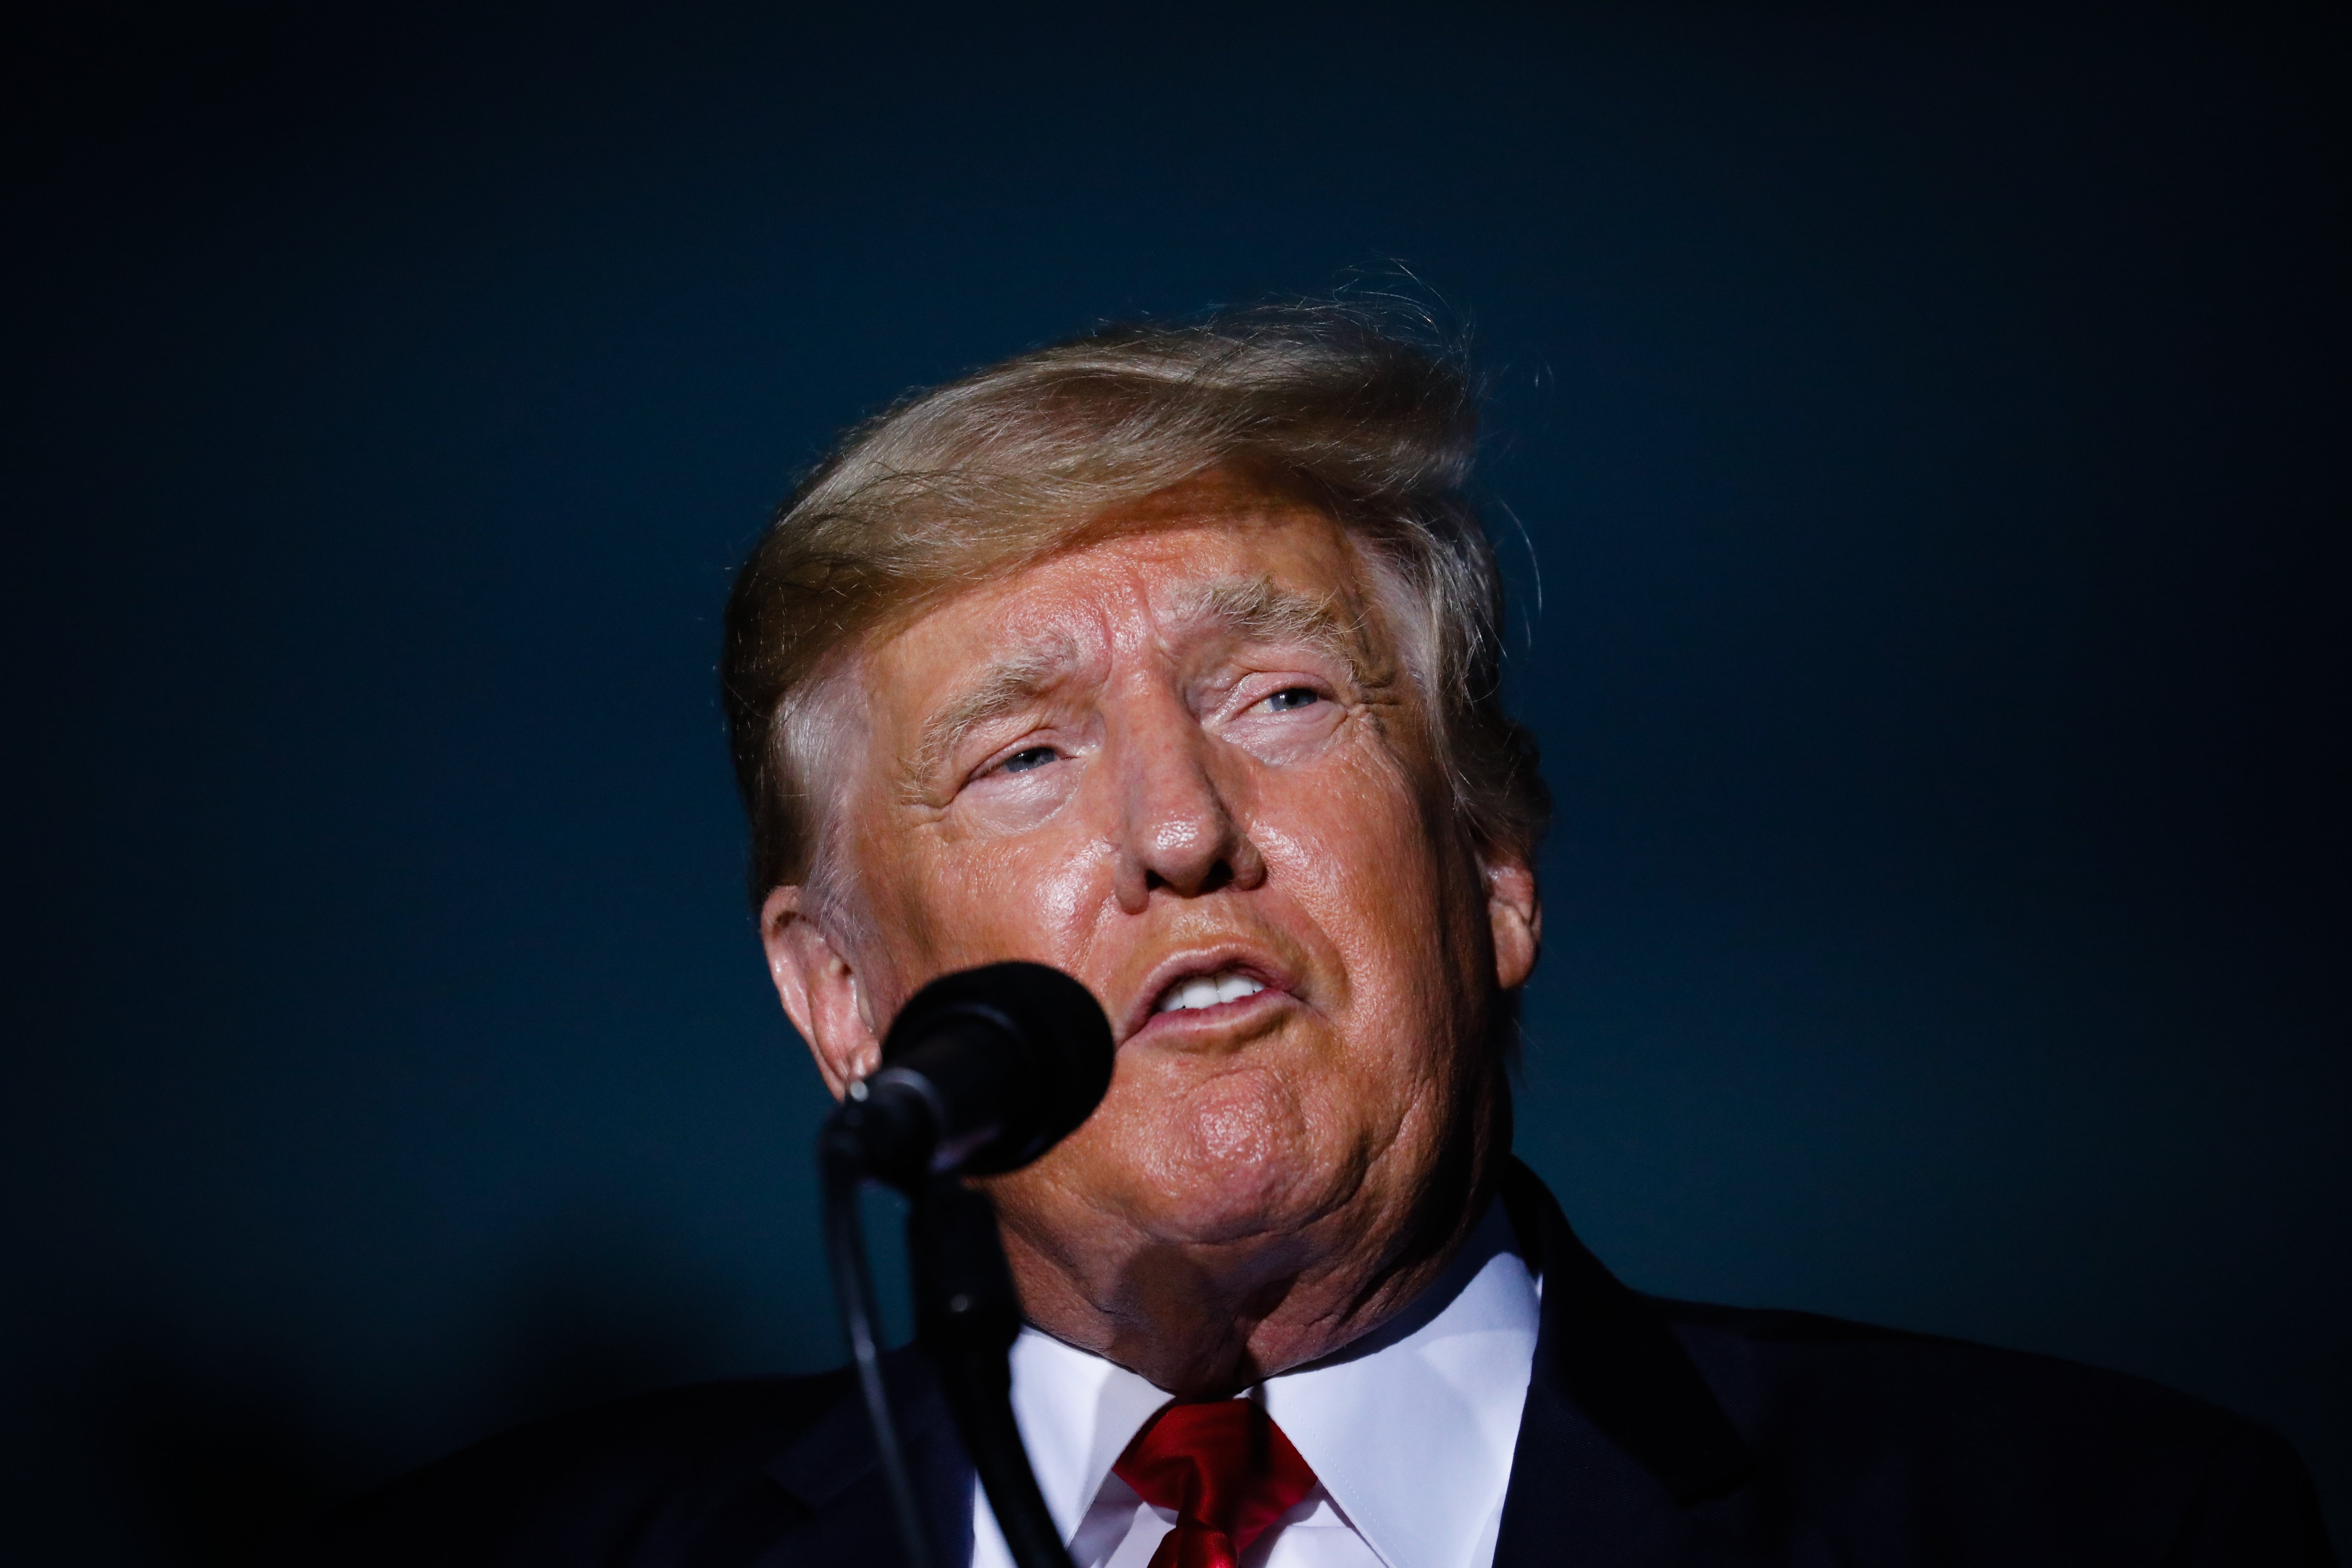 Former US President Donald Trump speaks during a rally on 3 July, 2021 in Sarasota, Florida. Mr Trump appeared to feign ignorance about tax law during the rally.